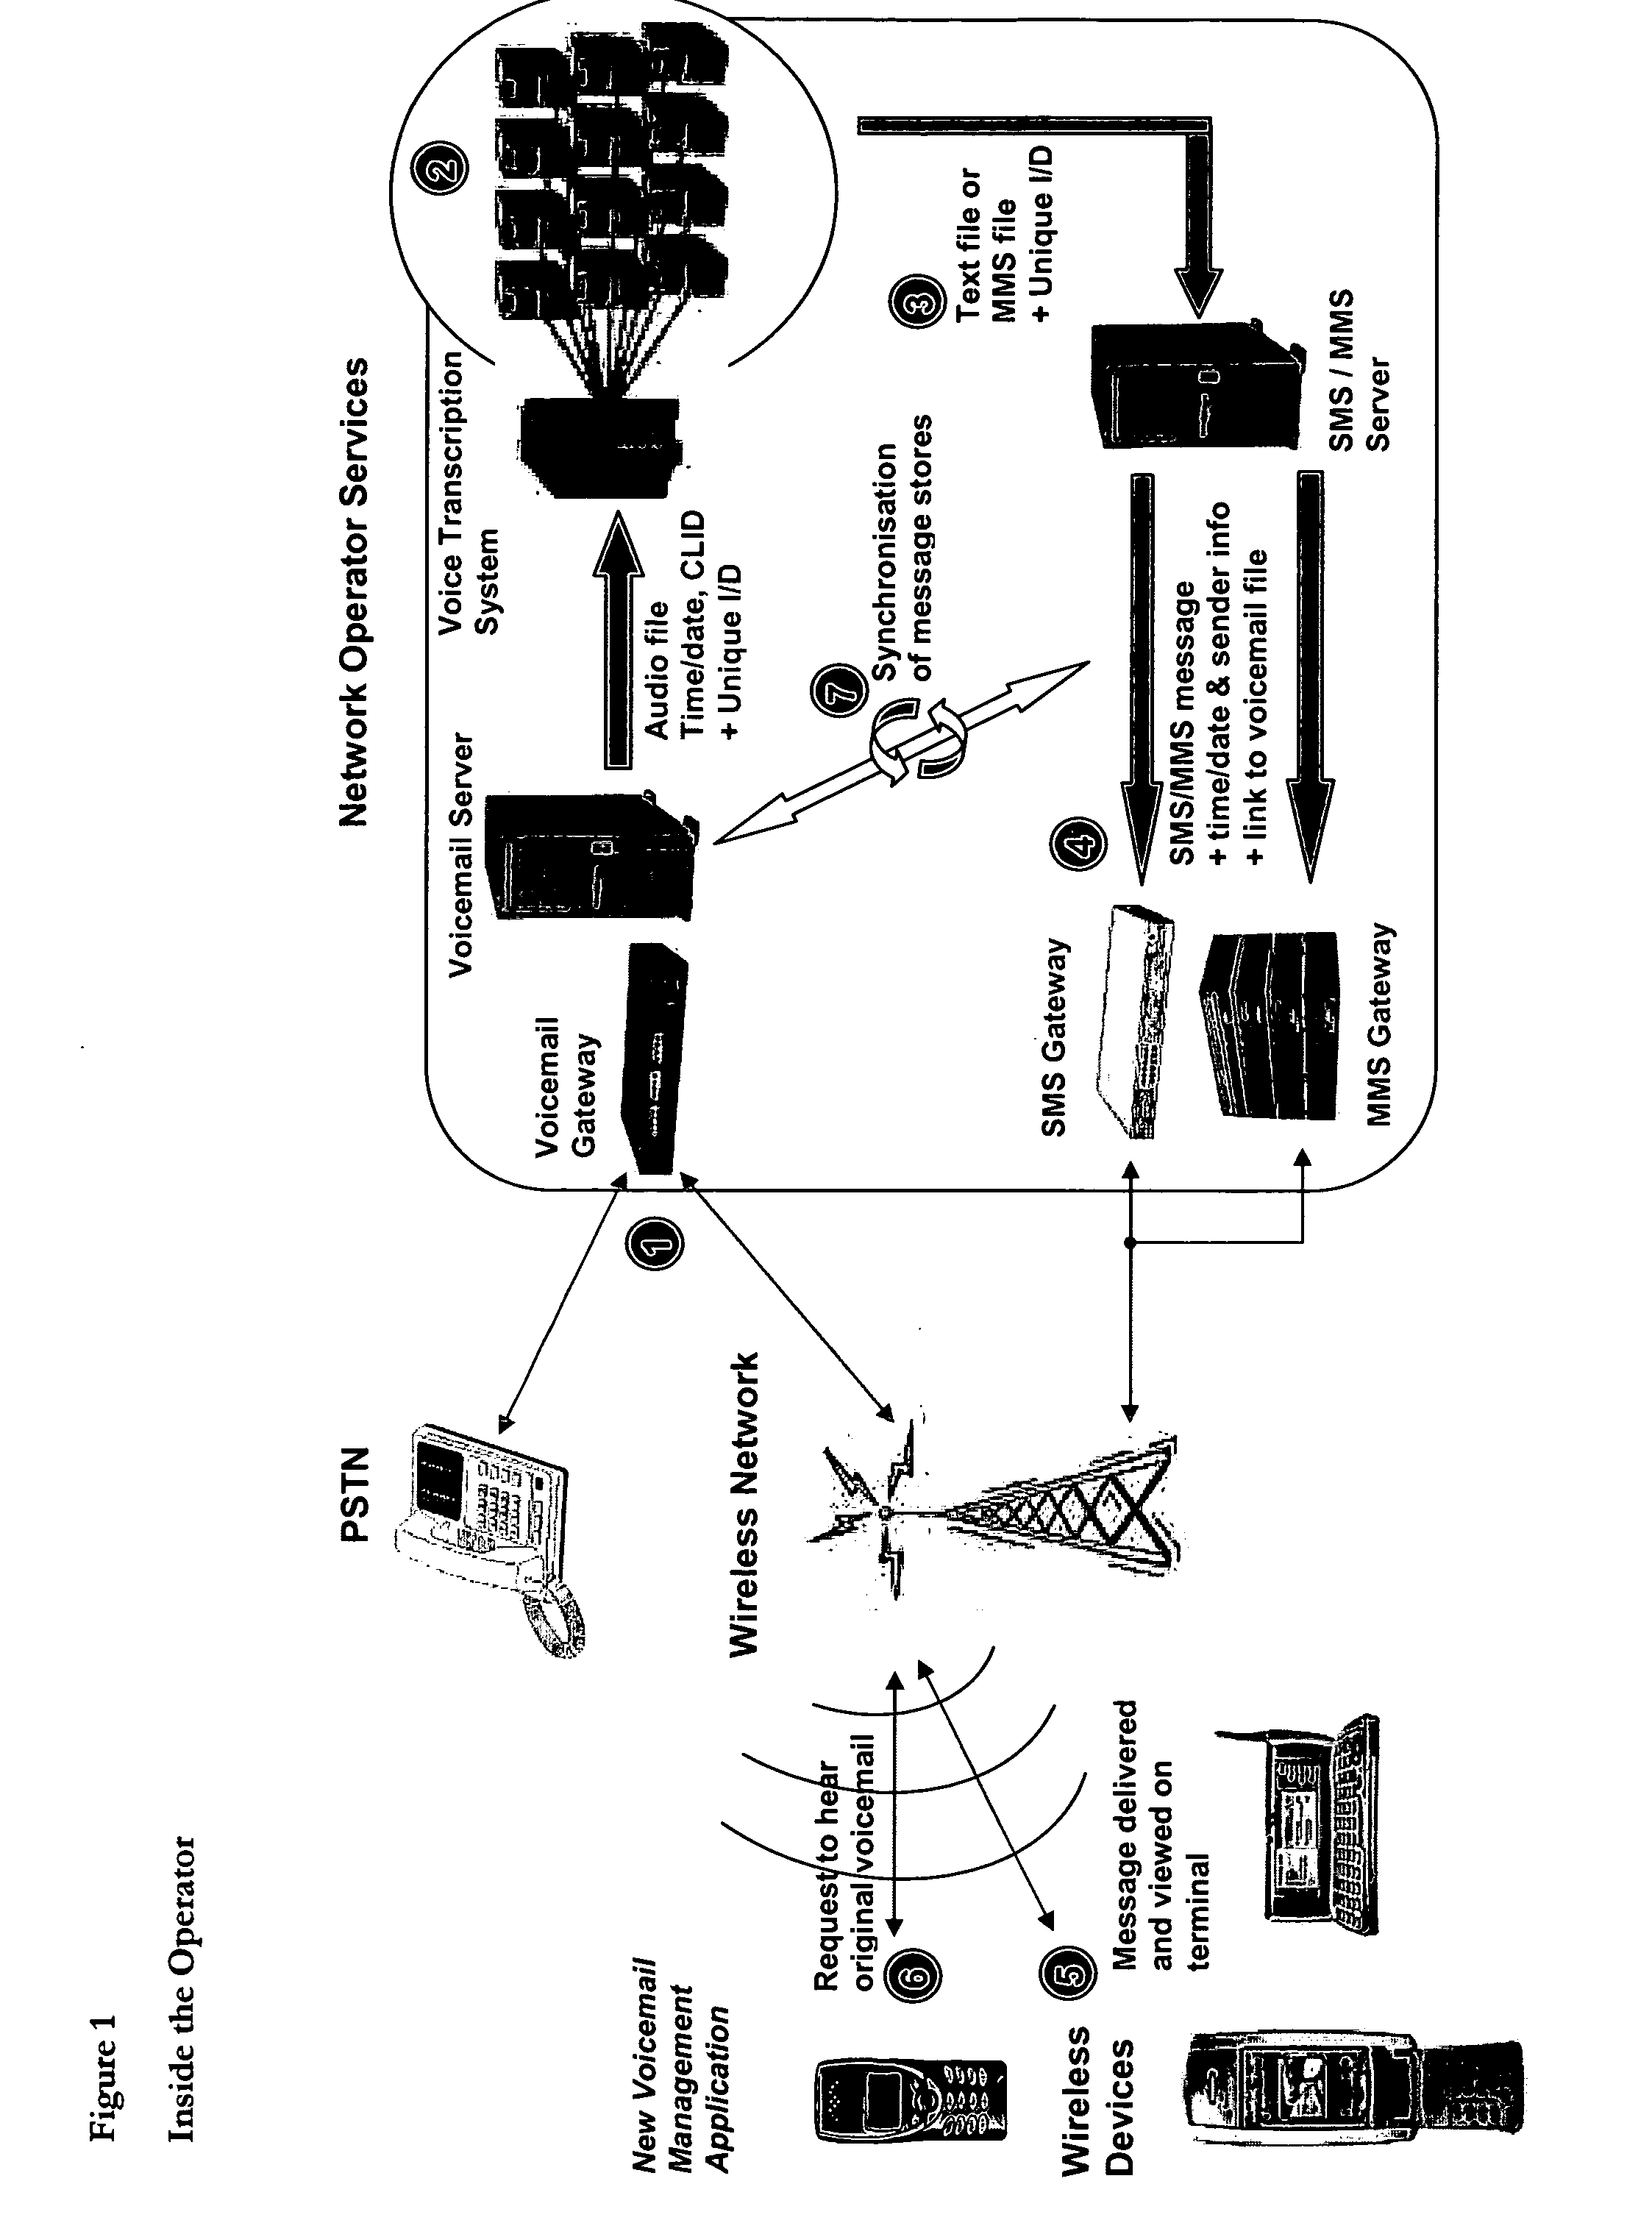 Method of managing voicemails from a mobile telephone